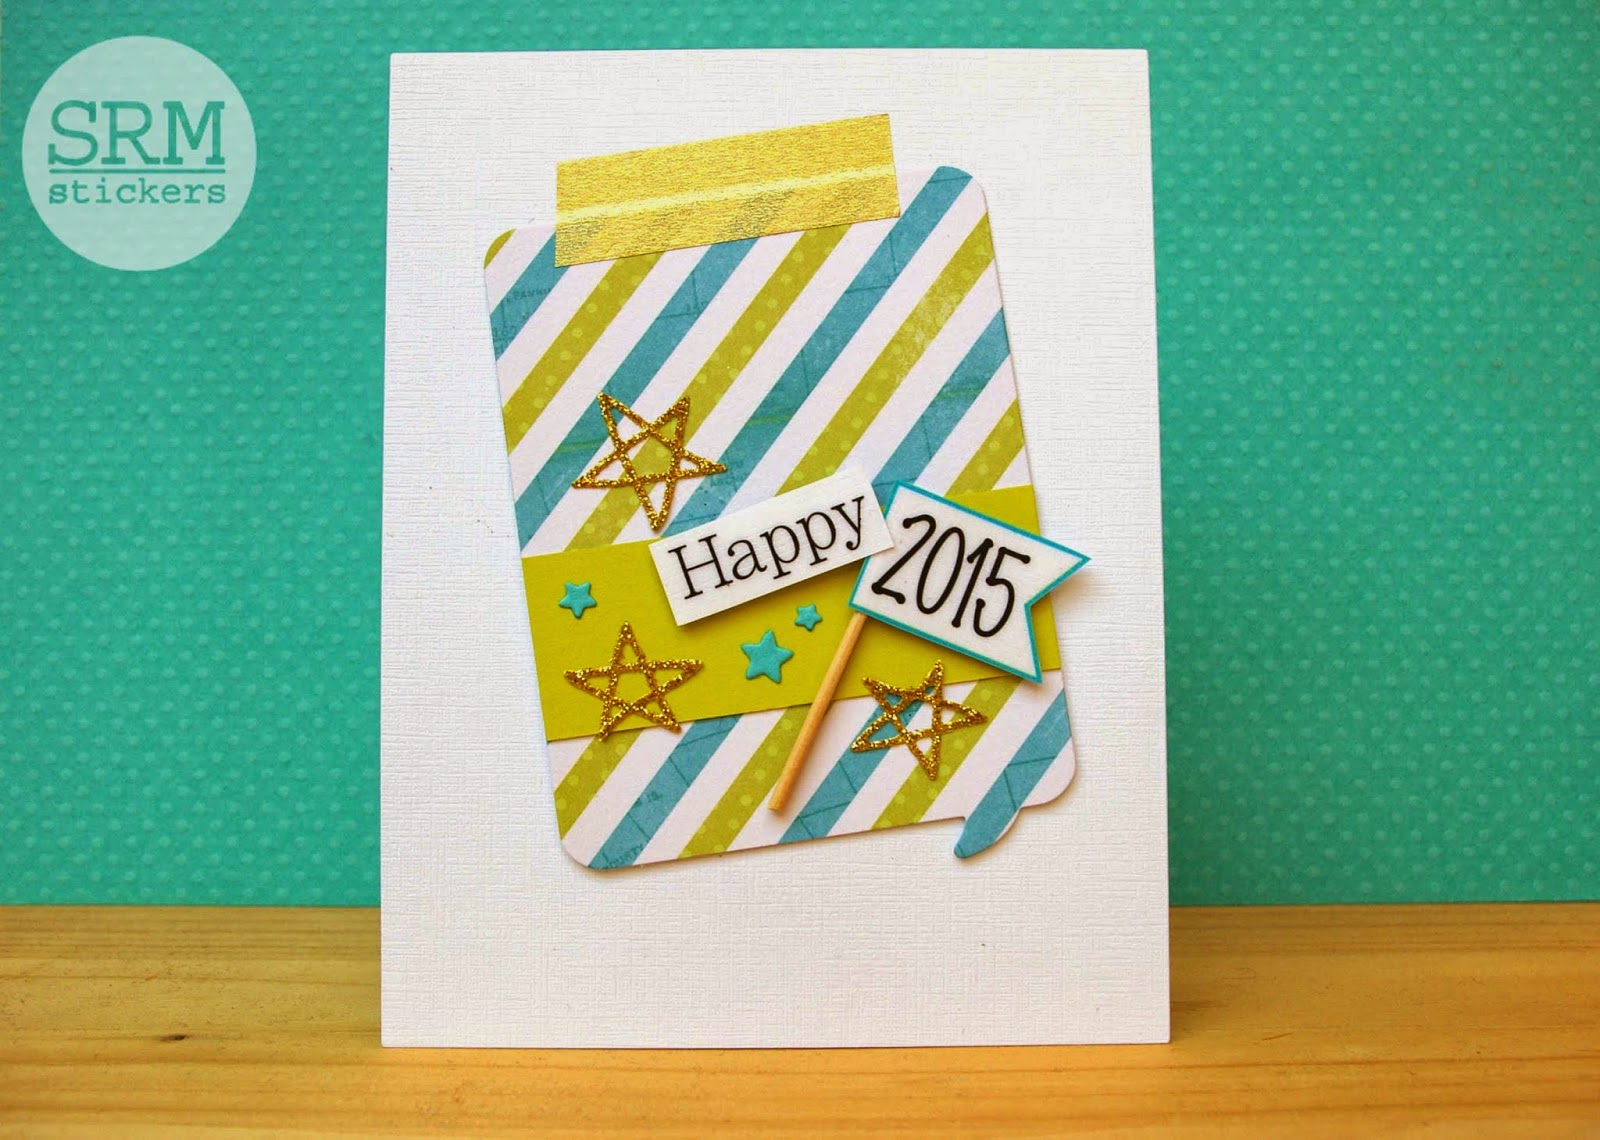 SRM Stickers Blogspot - Happy 2015 Card by Lorena - #card #2015 #newyears #stickers